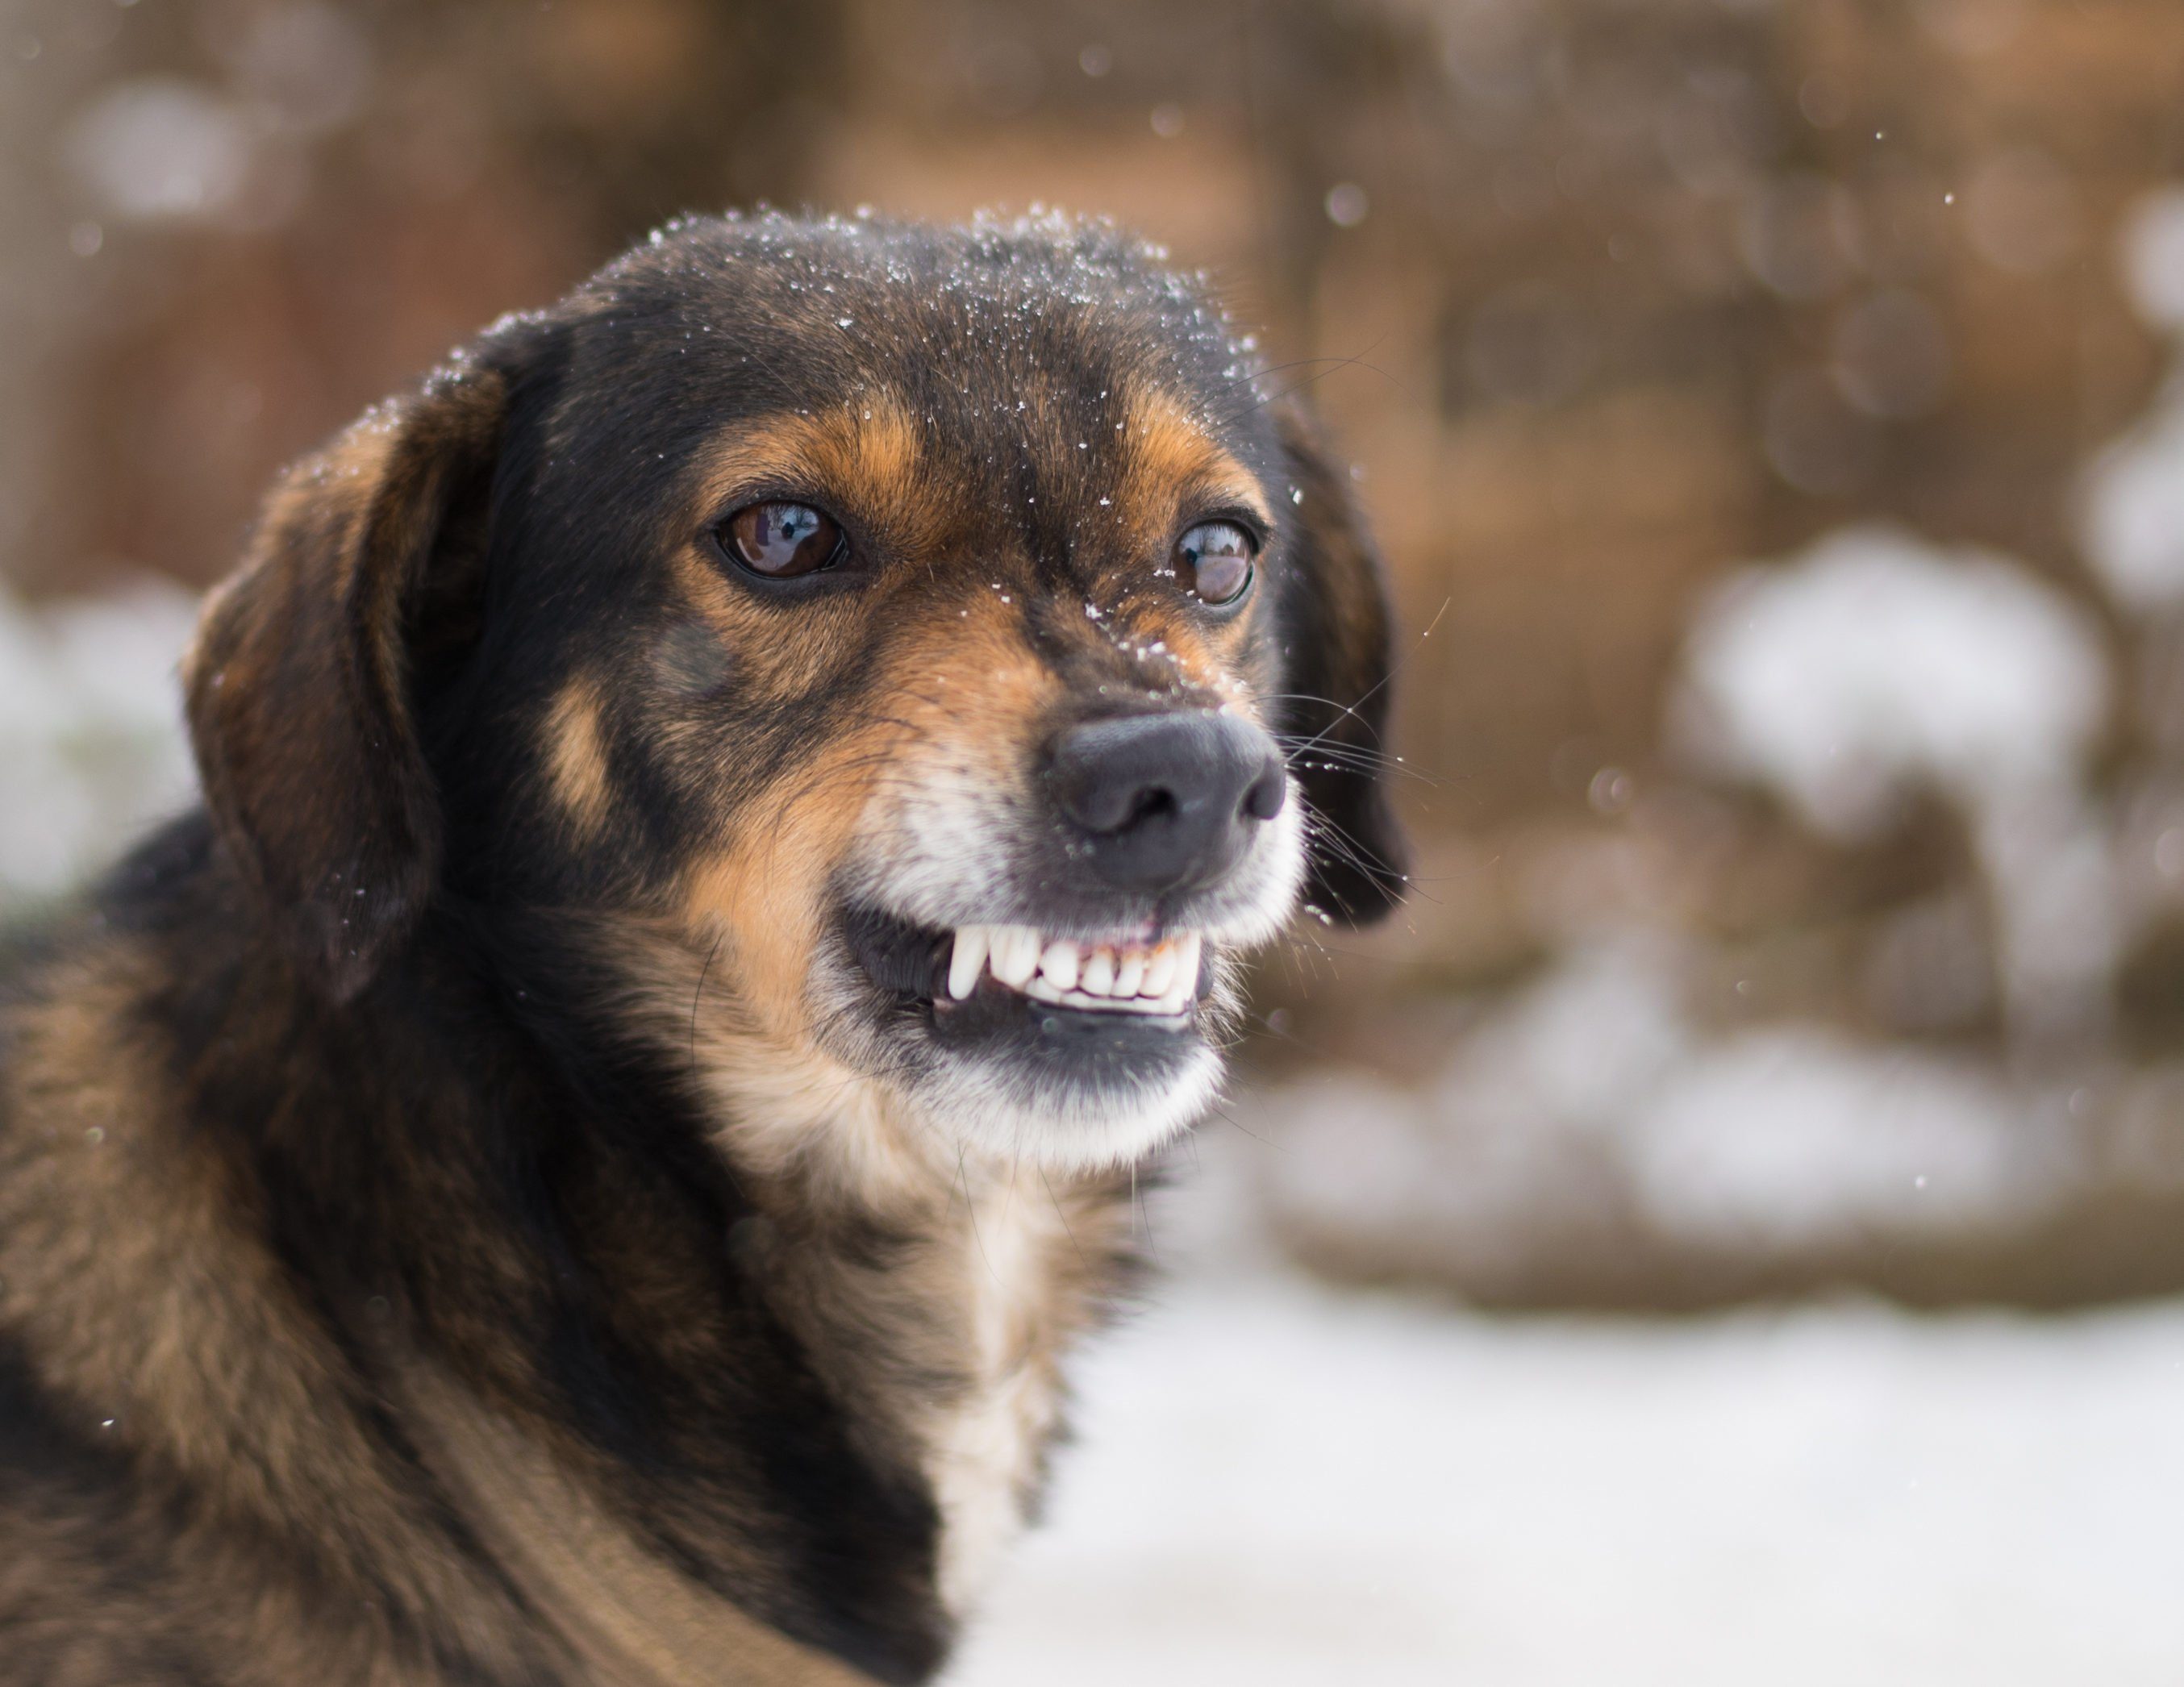 Angry dog shows teeth. Pets. Wicked aggressive dog. Angry dangerous dog protection barking attacks. "best friend" , Enraged aggressive, angry dog. Grin jaws with fangs , hungry, drool.